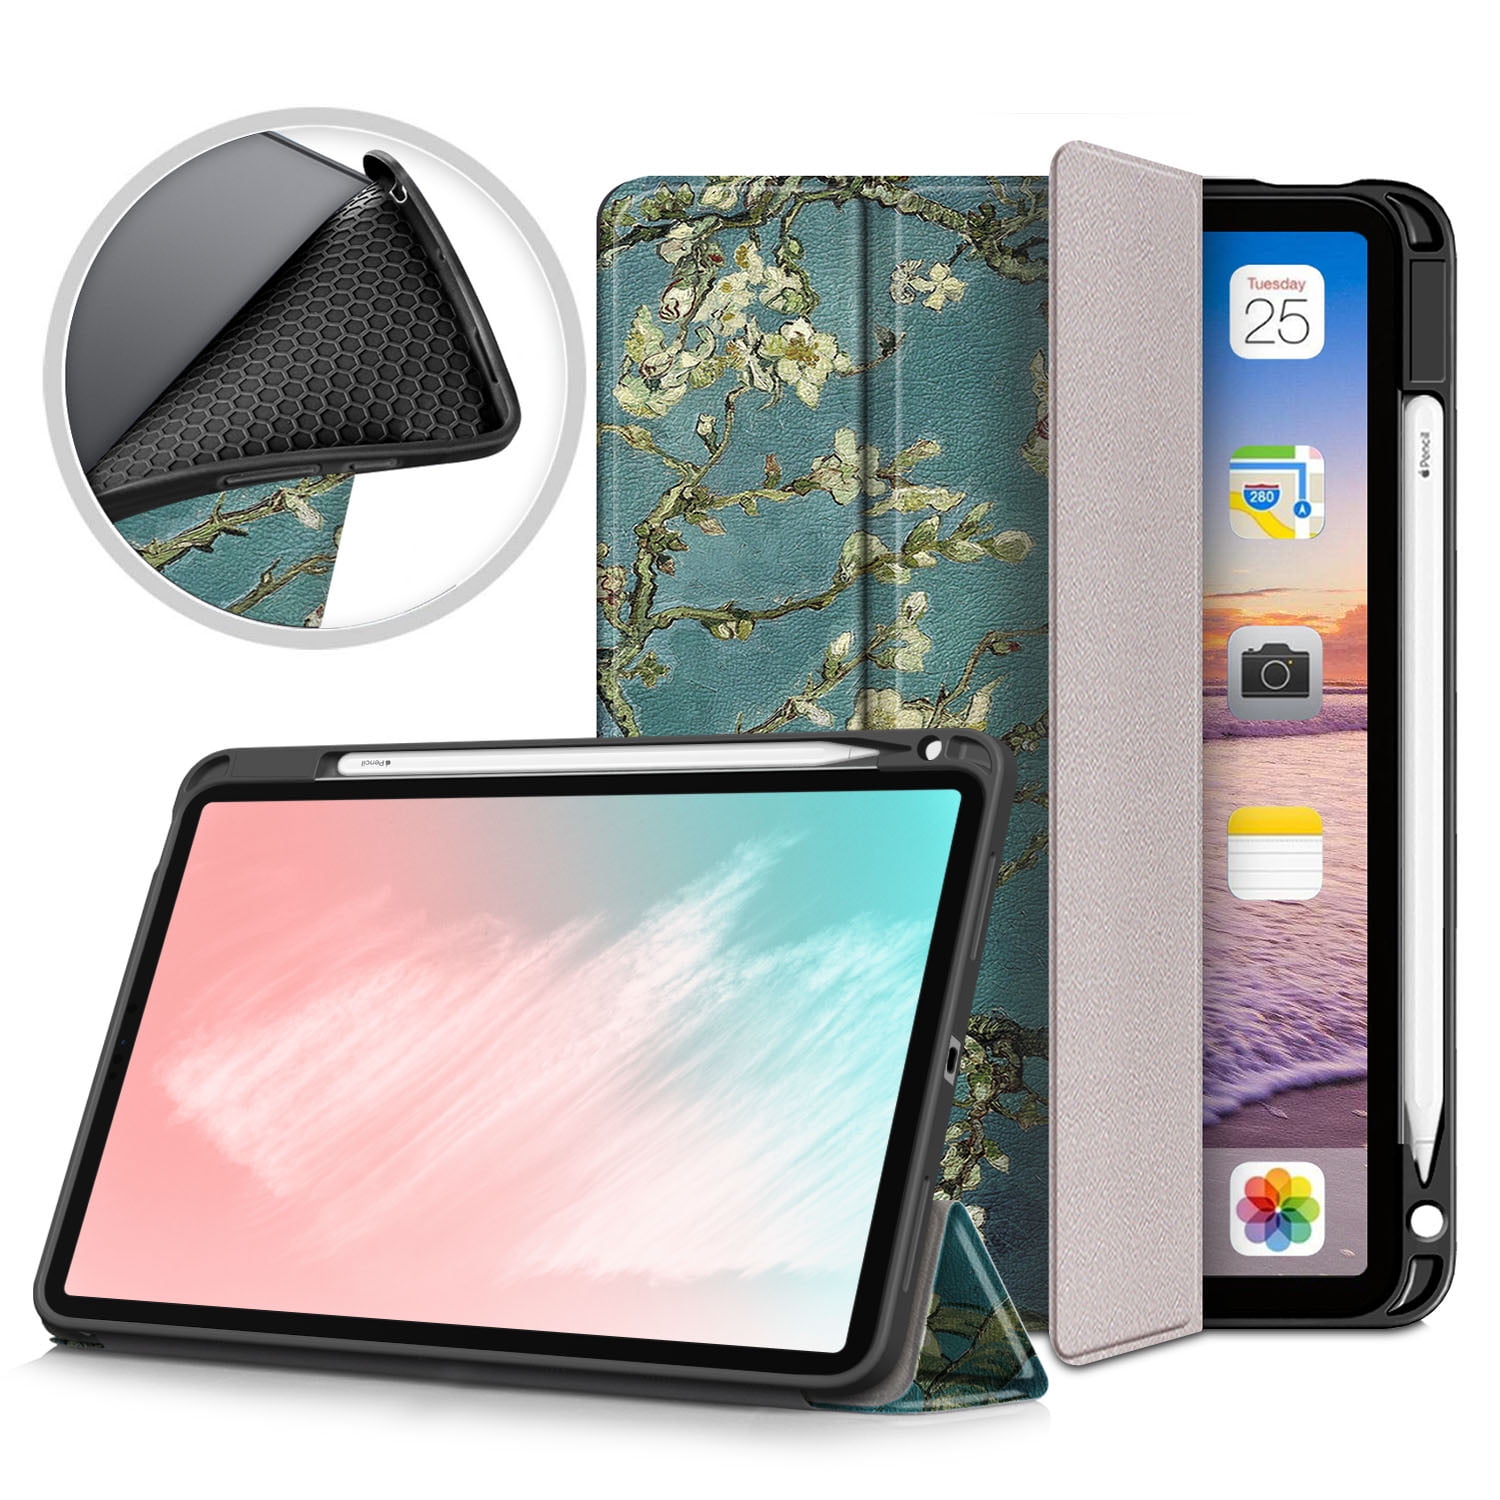 Arbitrage Onbepaald Pence iPad Air 5th 4th Generation Case, iPad 10.9" Case 2022 2020, Allytech Ultra  Slim Trifold Stand Protective Multi Angle Stand Pencil Holder Case Cover  for Apple iPad Air 4 5, Eiffel Tower - Walmart.com